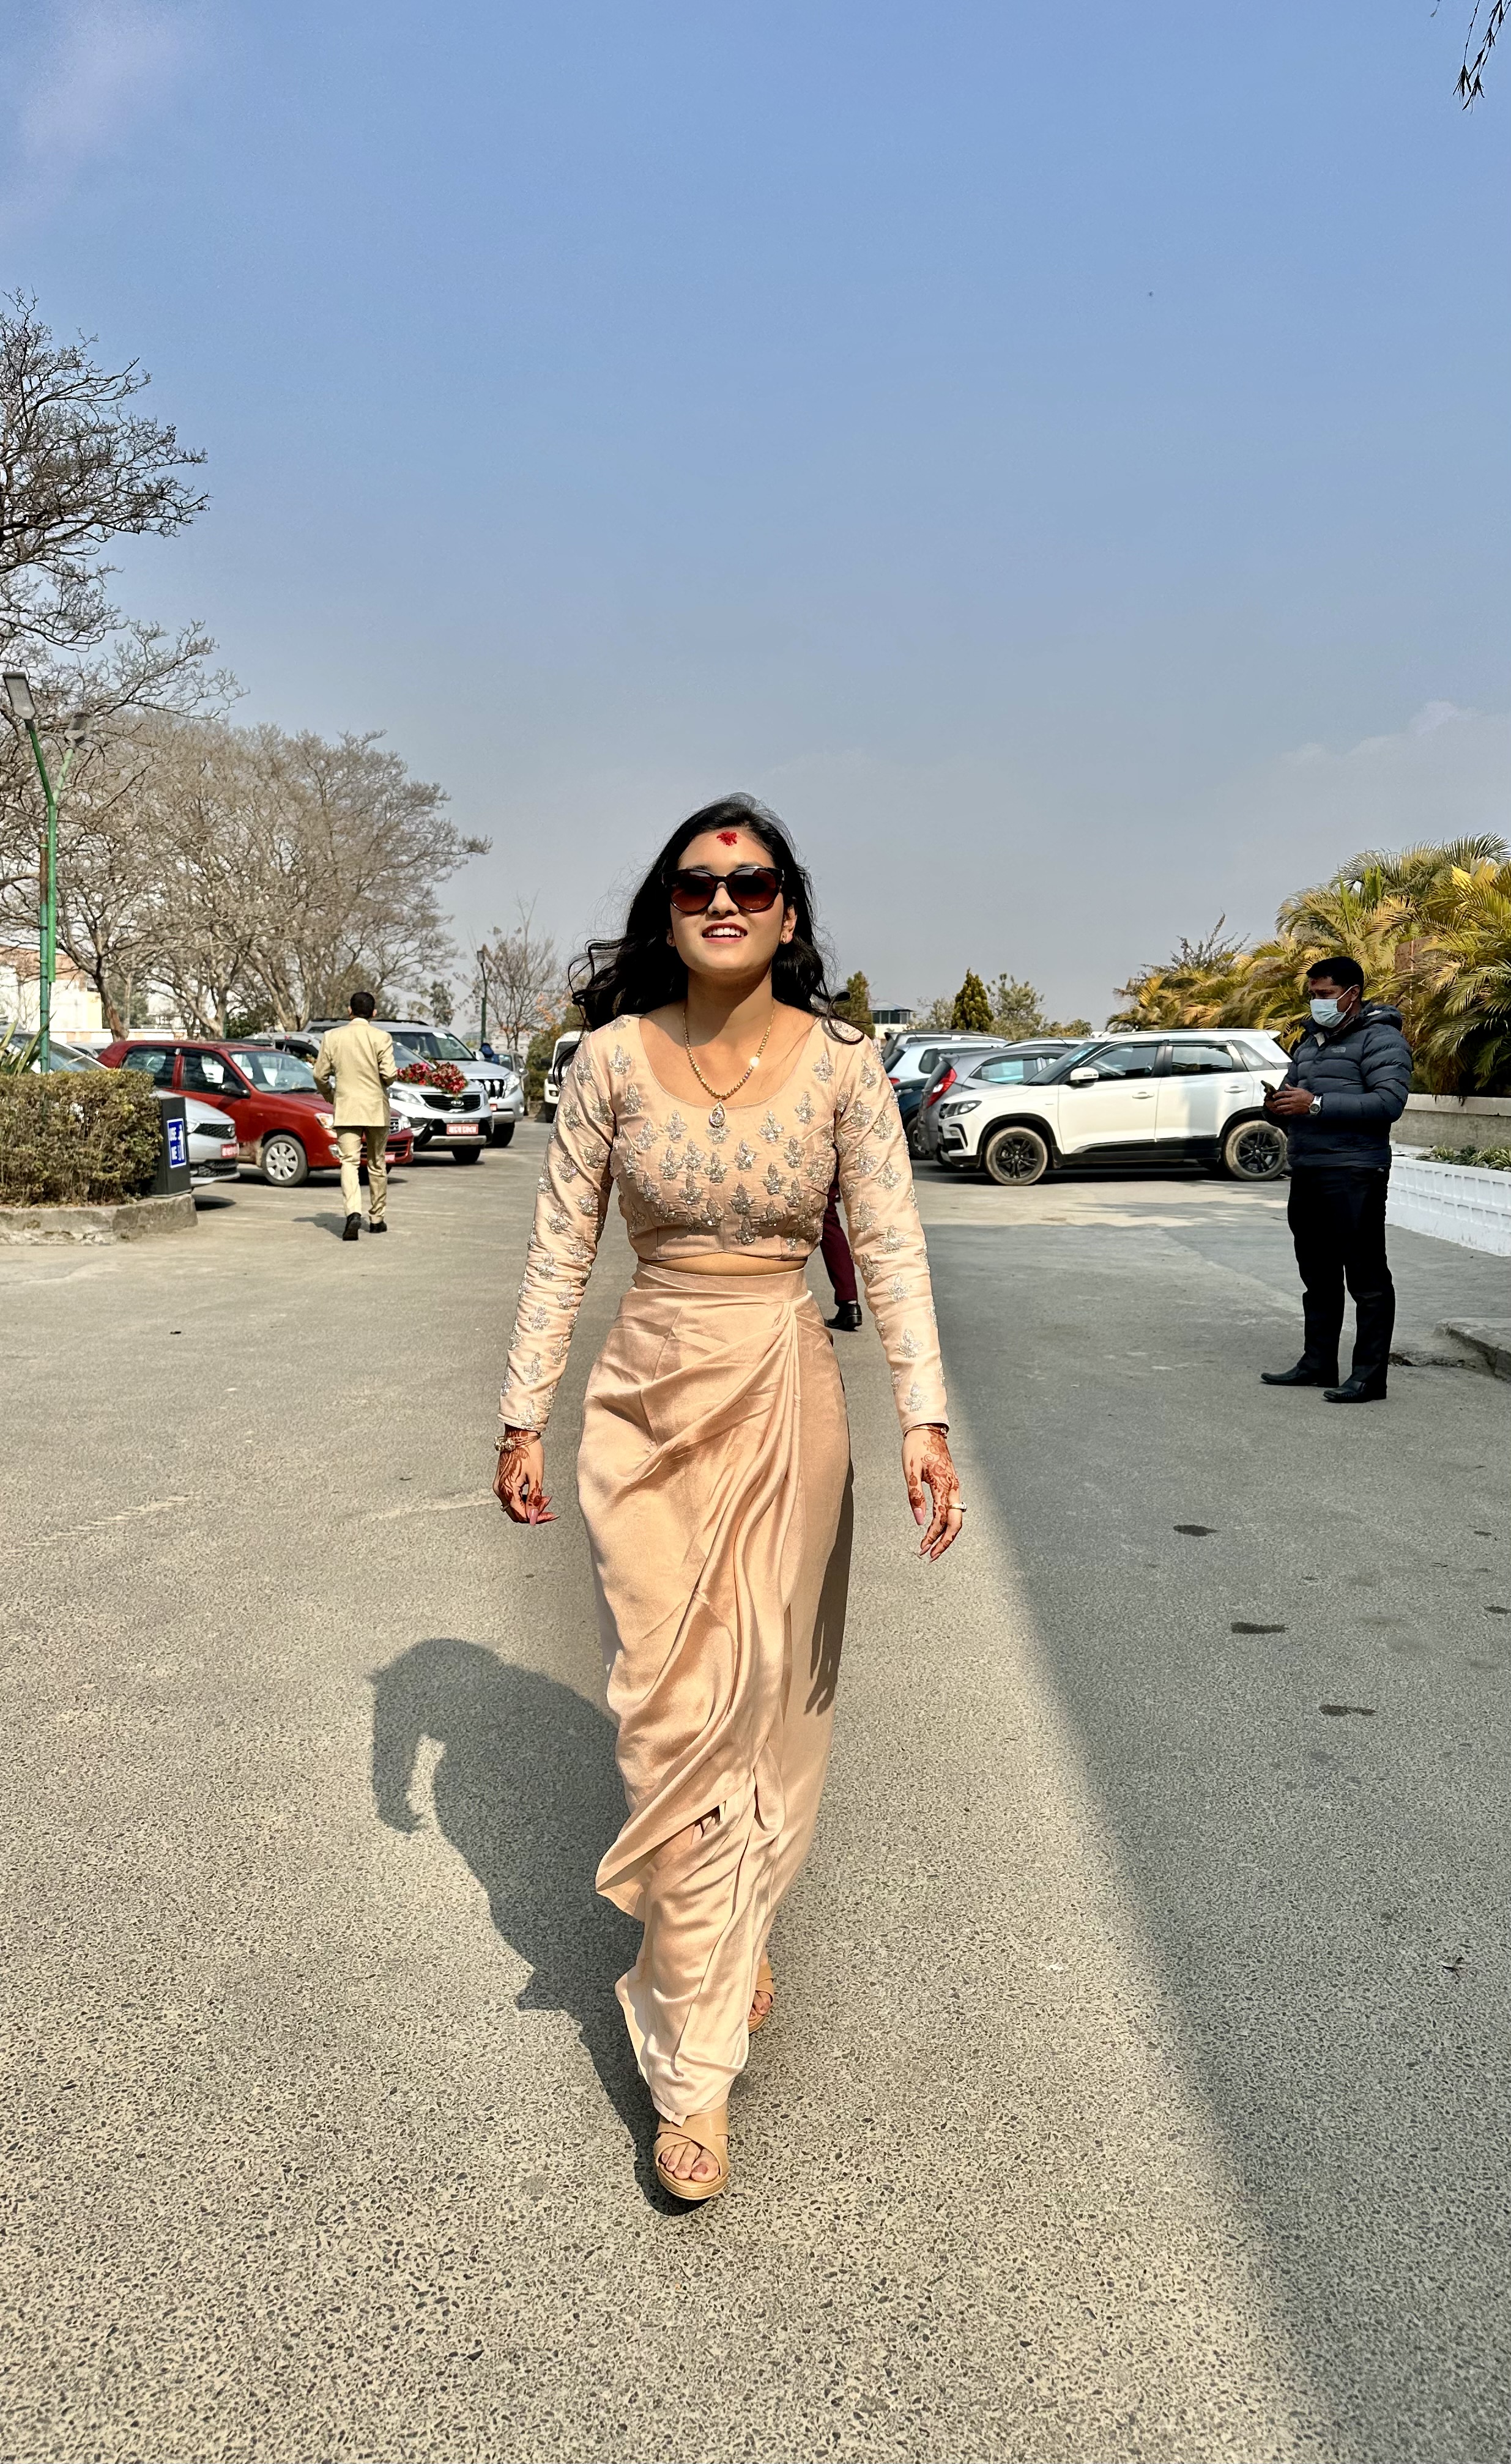 Asmina wearing a formal gown and sunglasses.